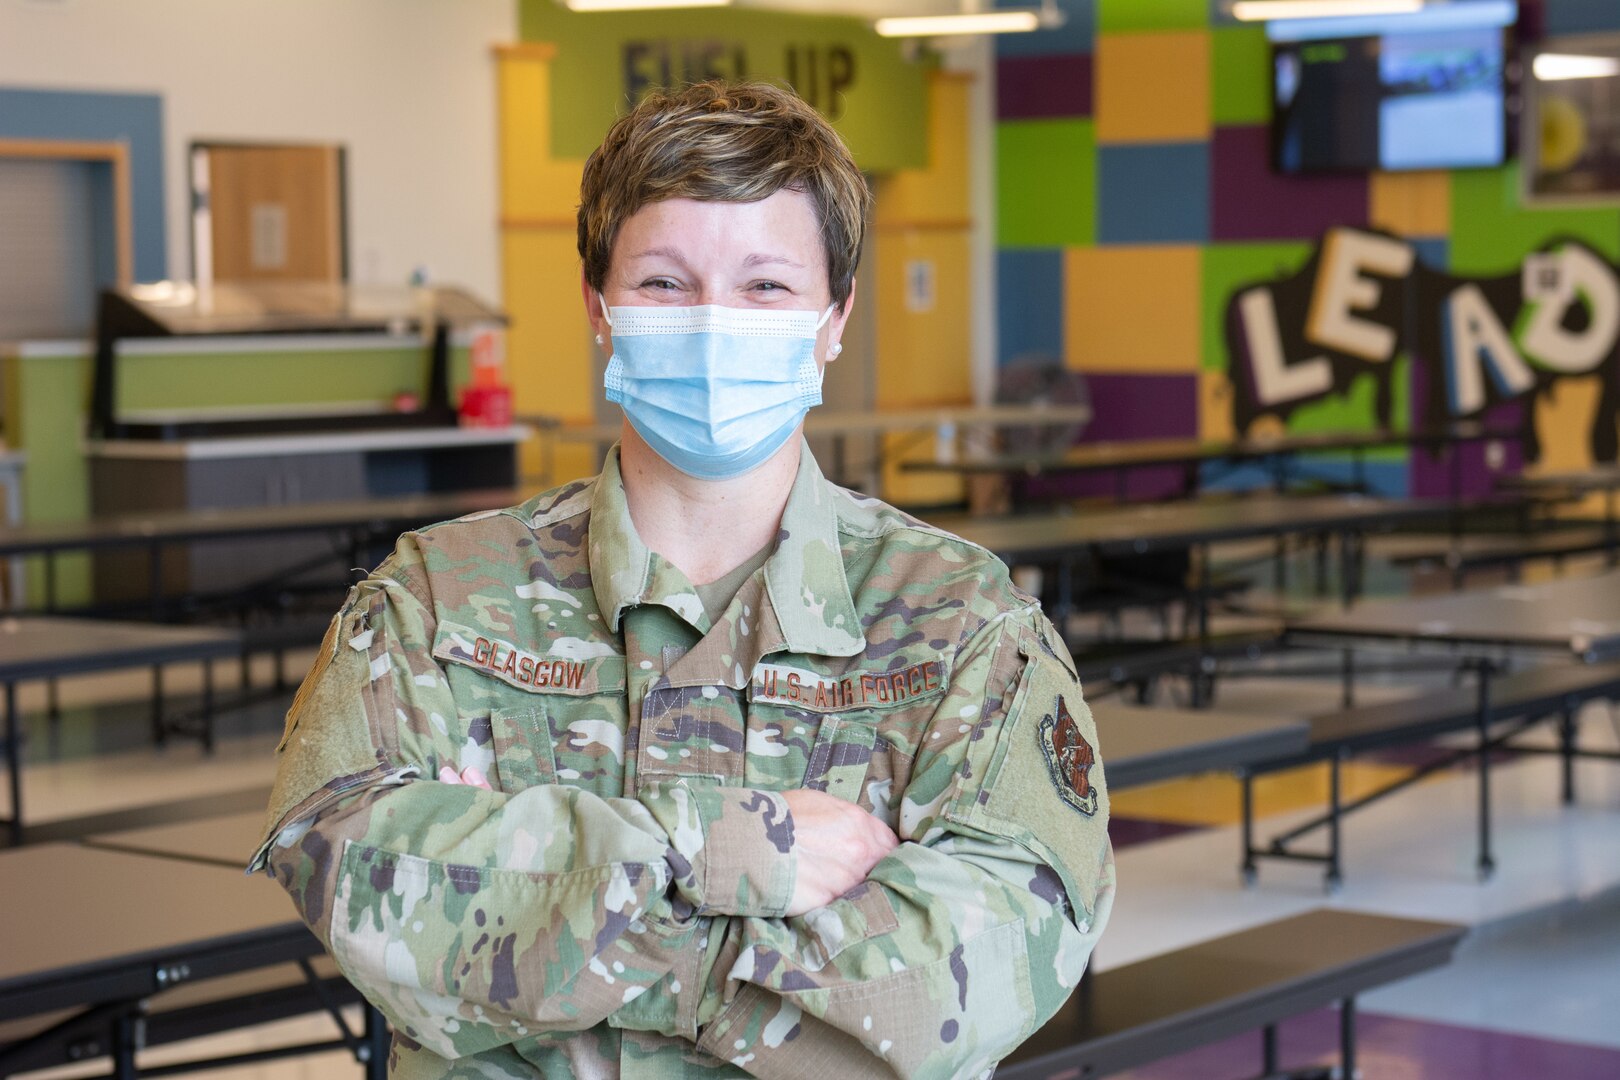 U.S. Air National Guard Senior Master Sgt. Cami Glasgow helped the Missouri National Guard package meals for the summer school food service program at the Cameron Veterans Middle School in Cameron, Missouri, July 31, 2020.